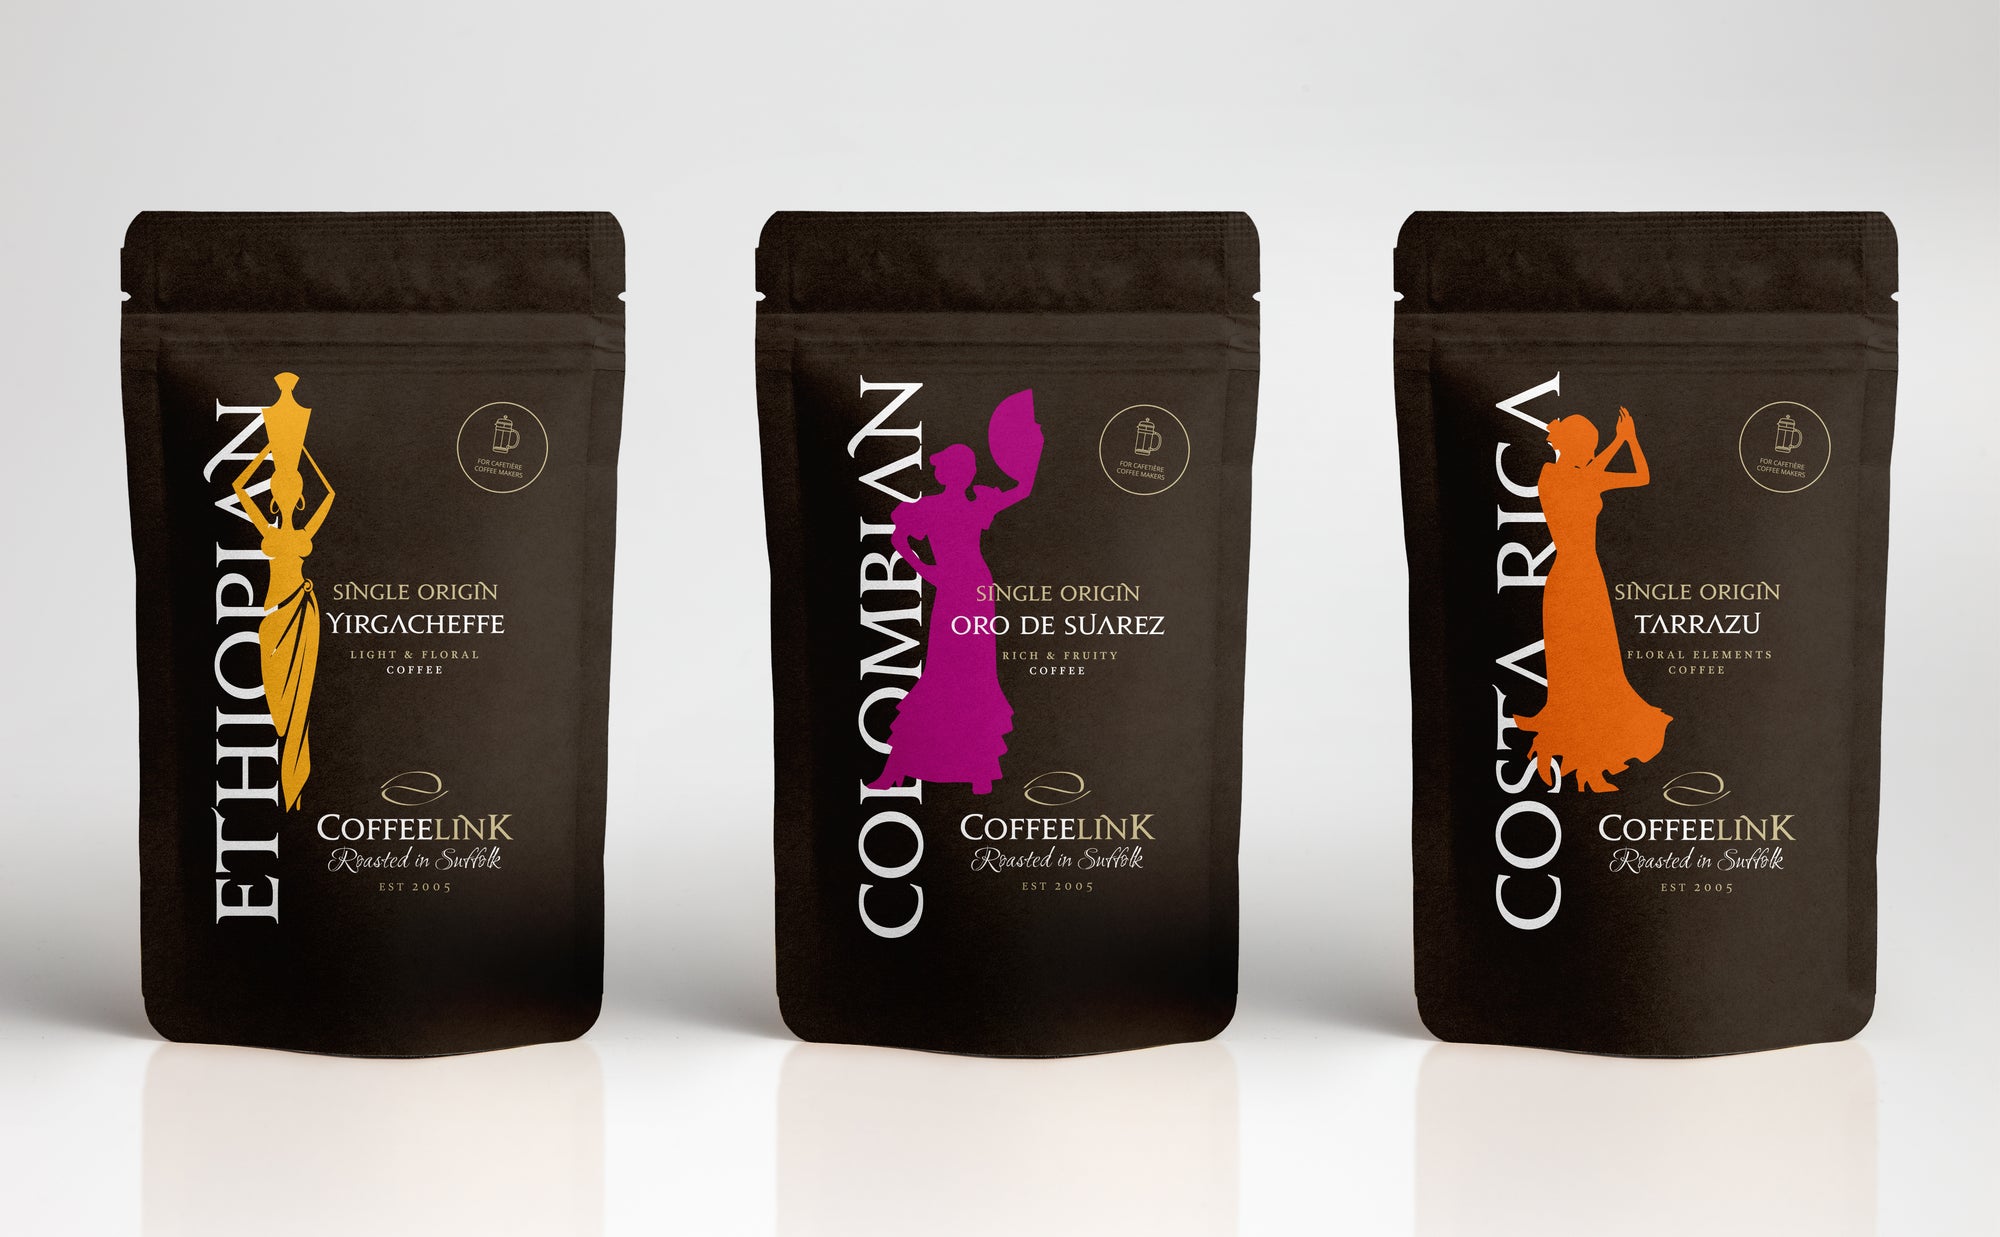 Introducing our NEW SINGLE ORIGIN coffees at affordable prices!